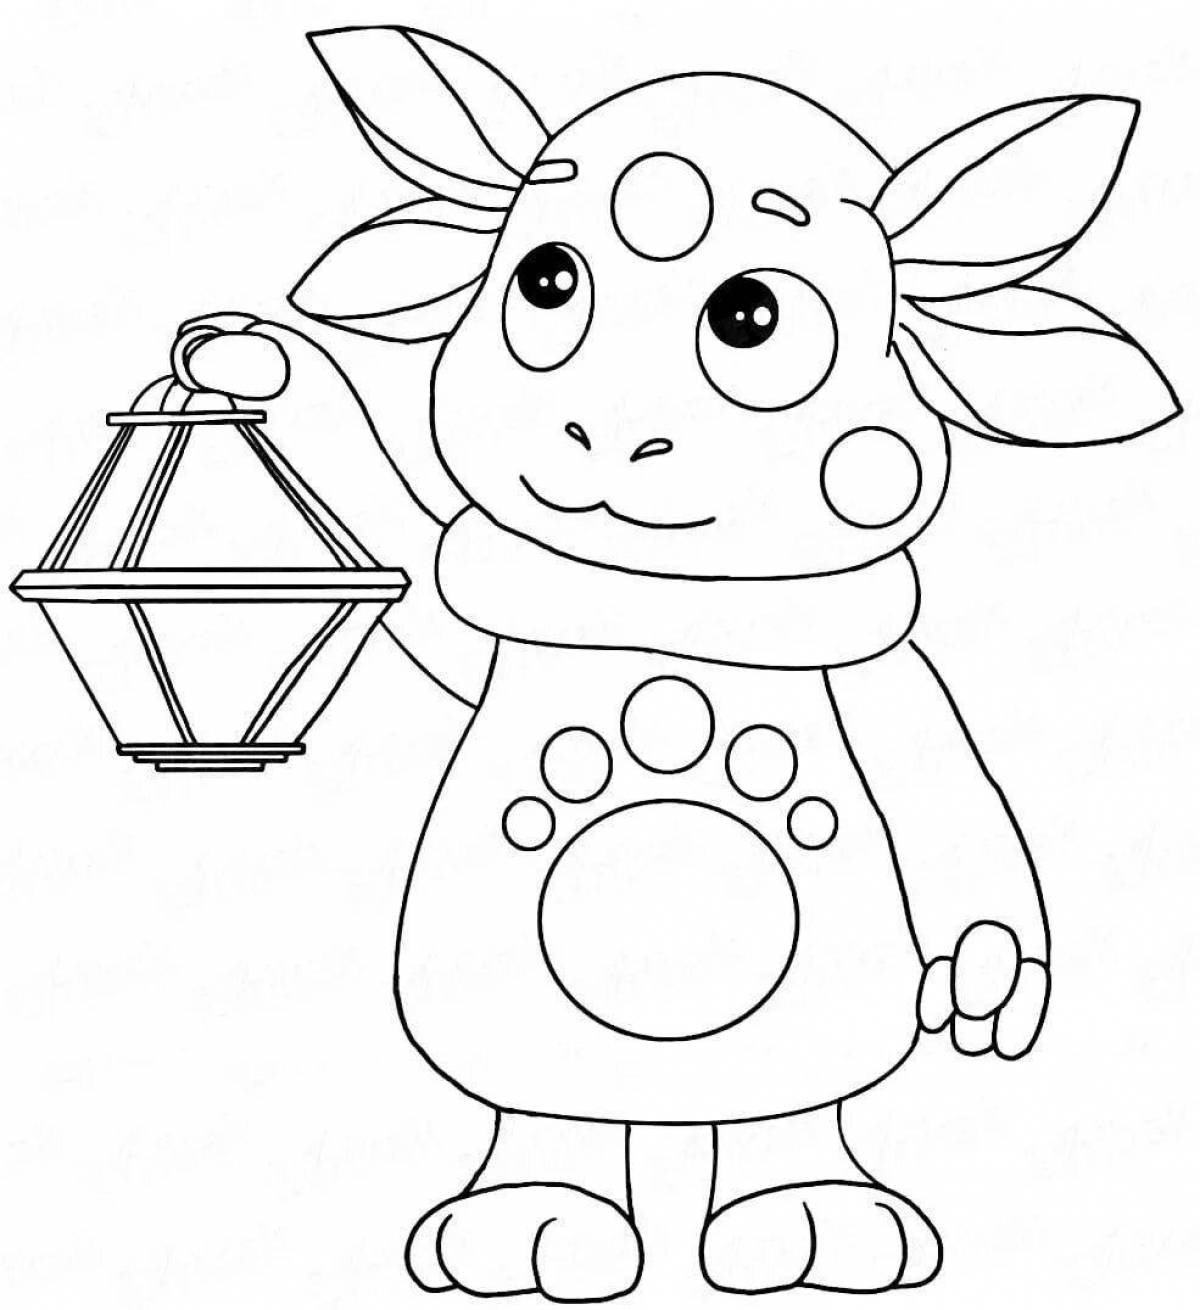 Coloring page wild print for kids